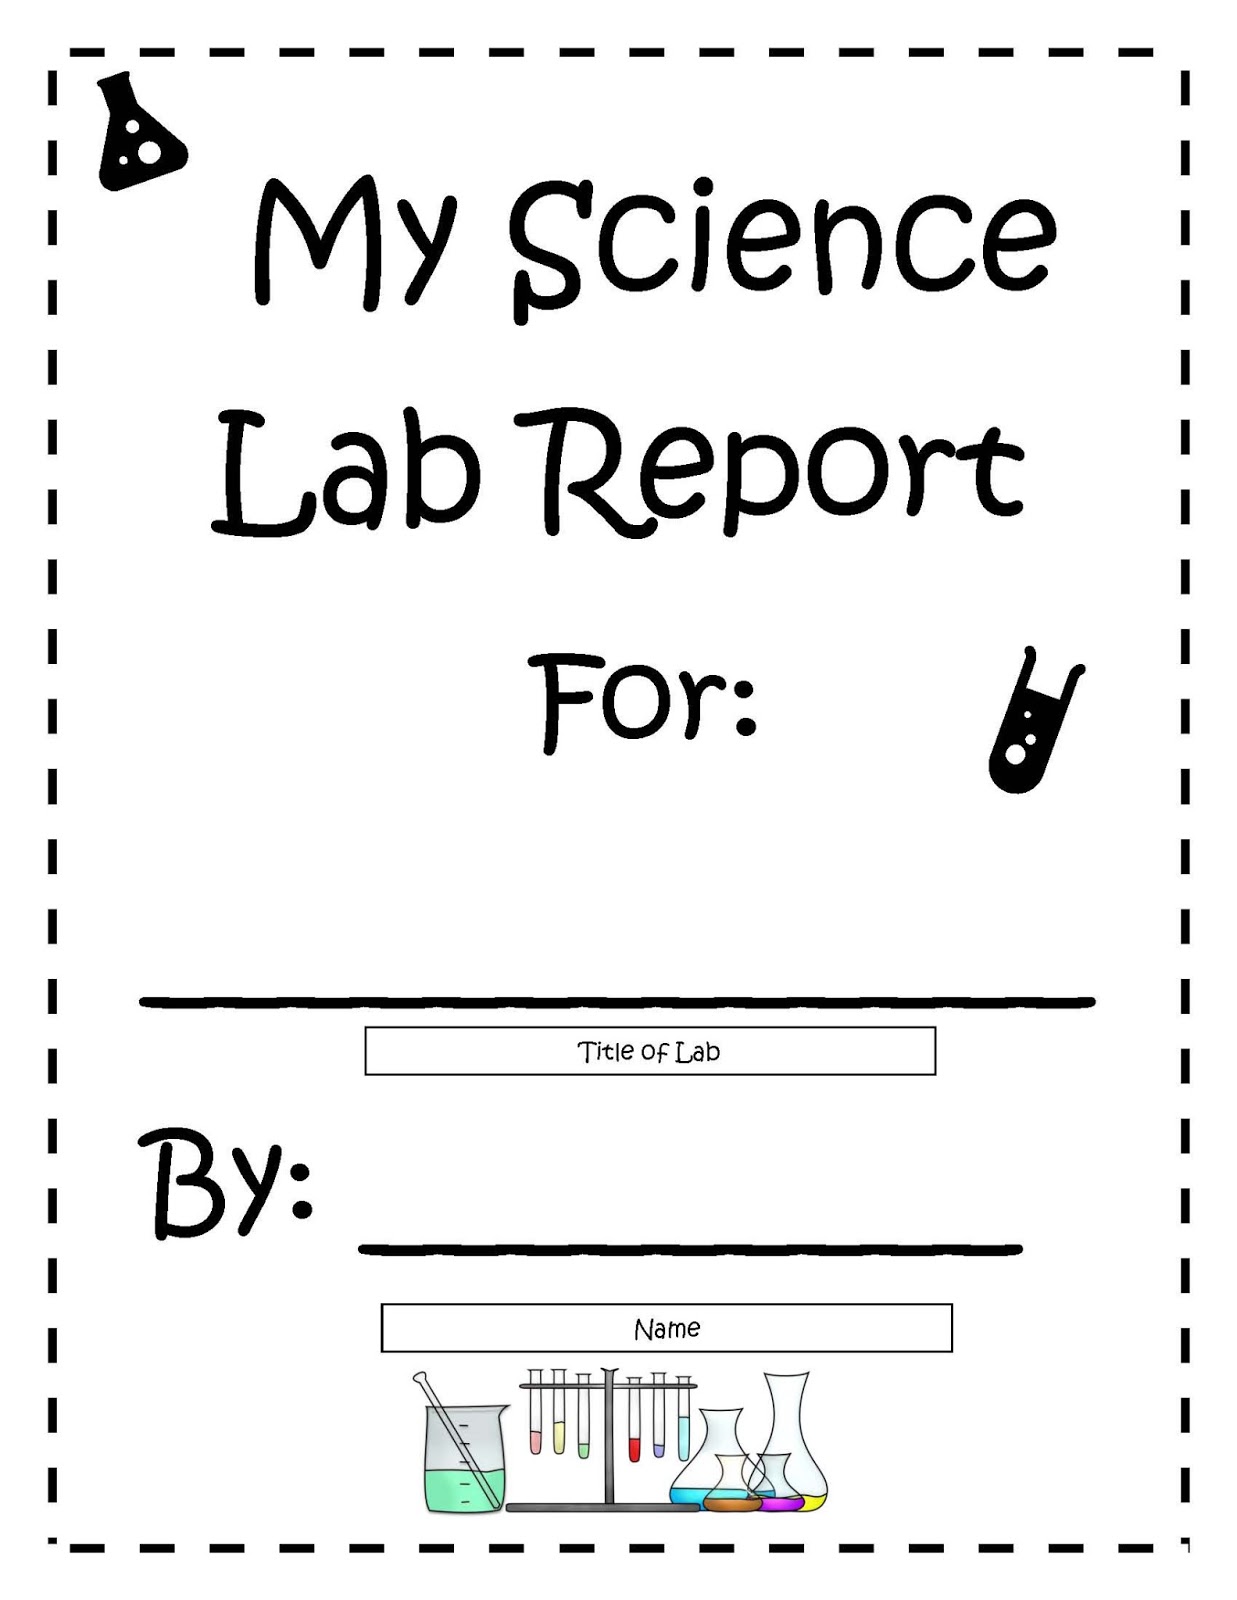 Experiment report template